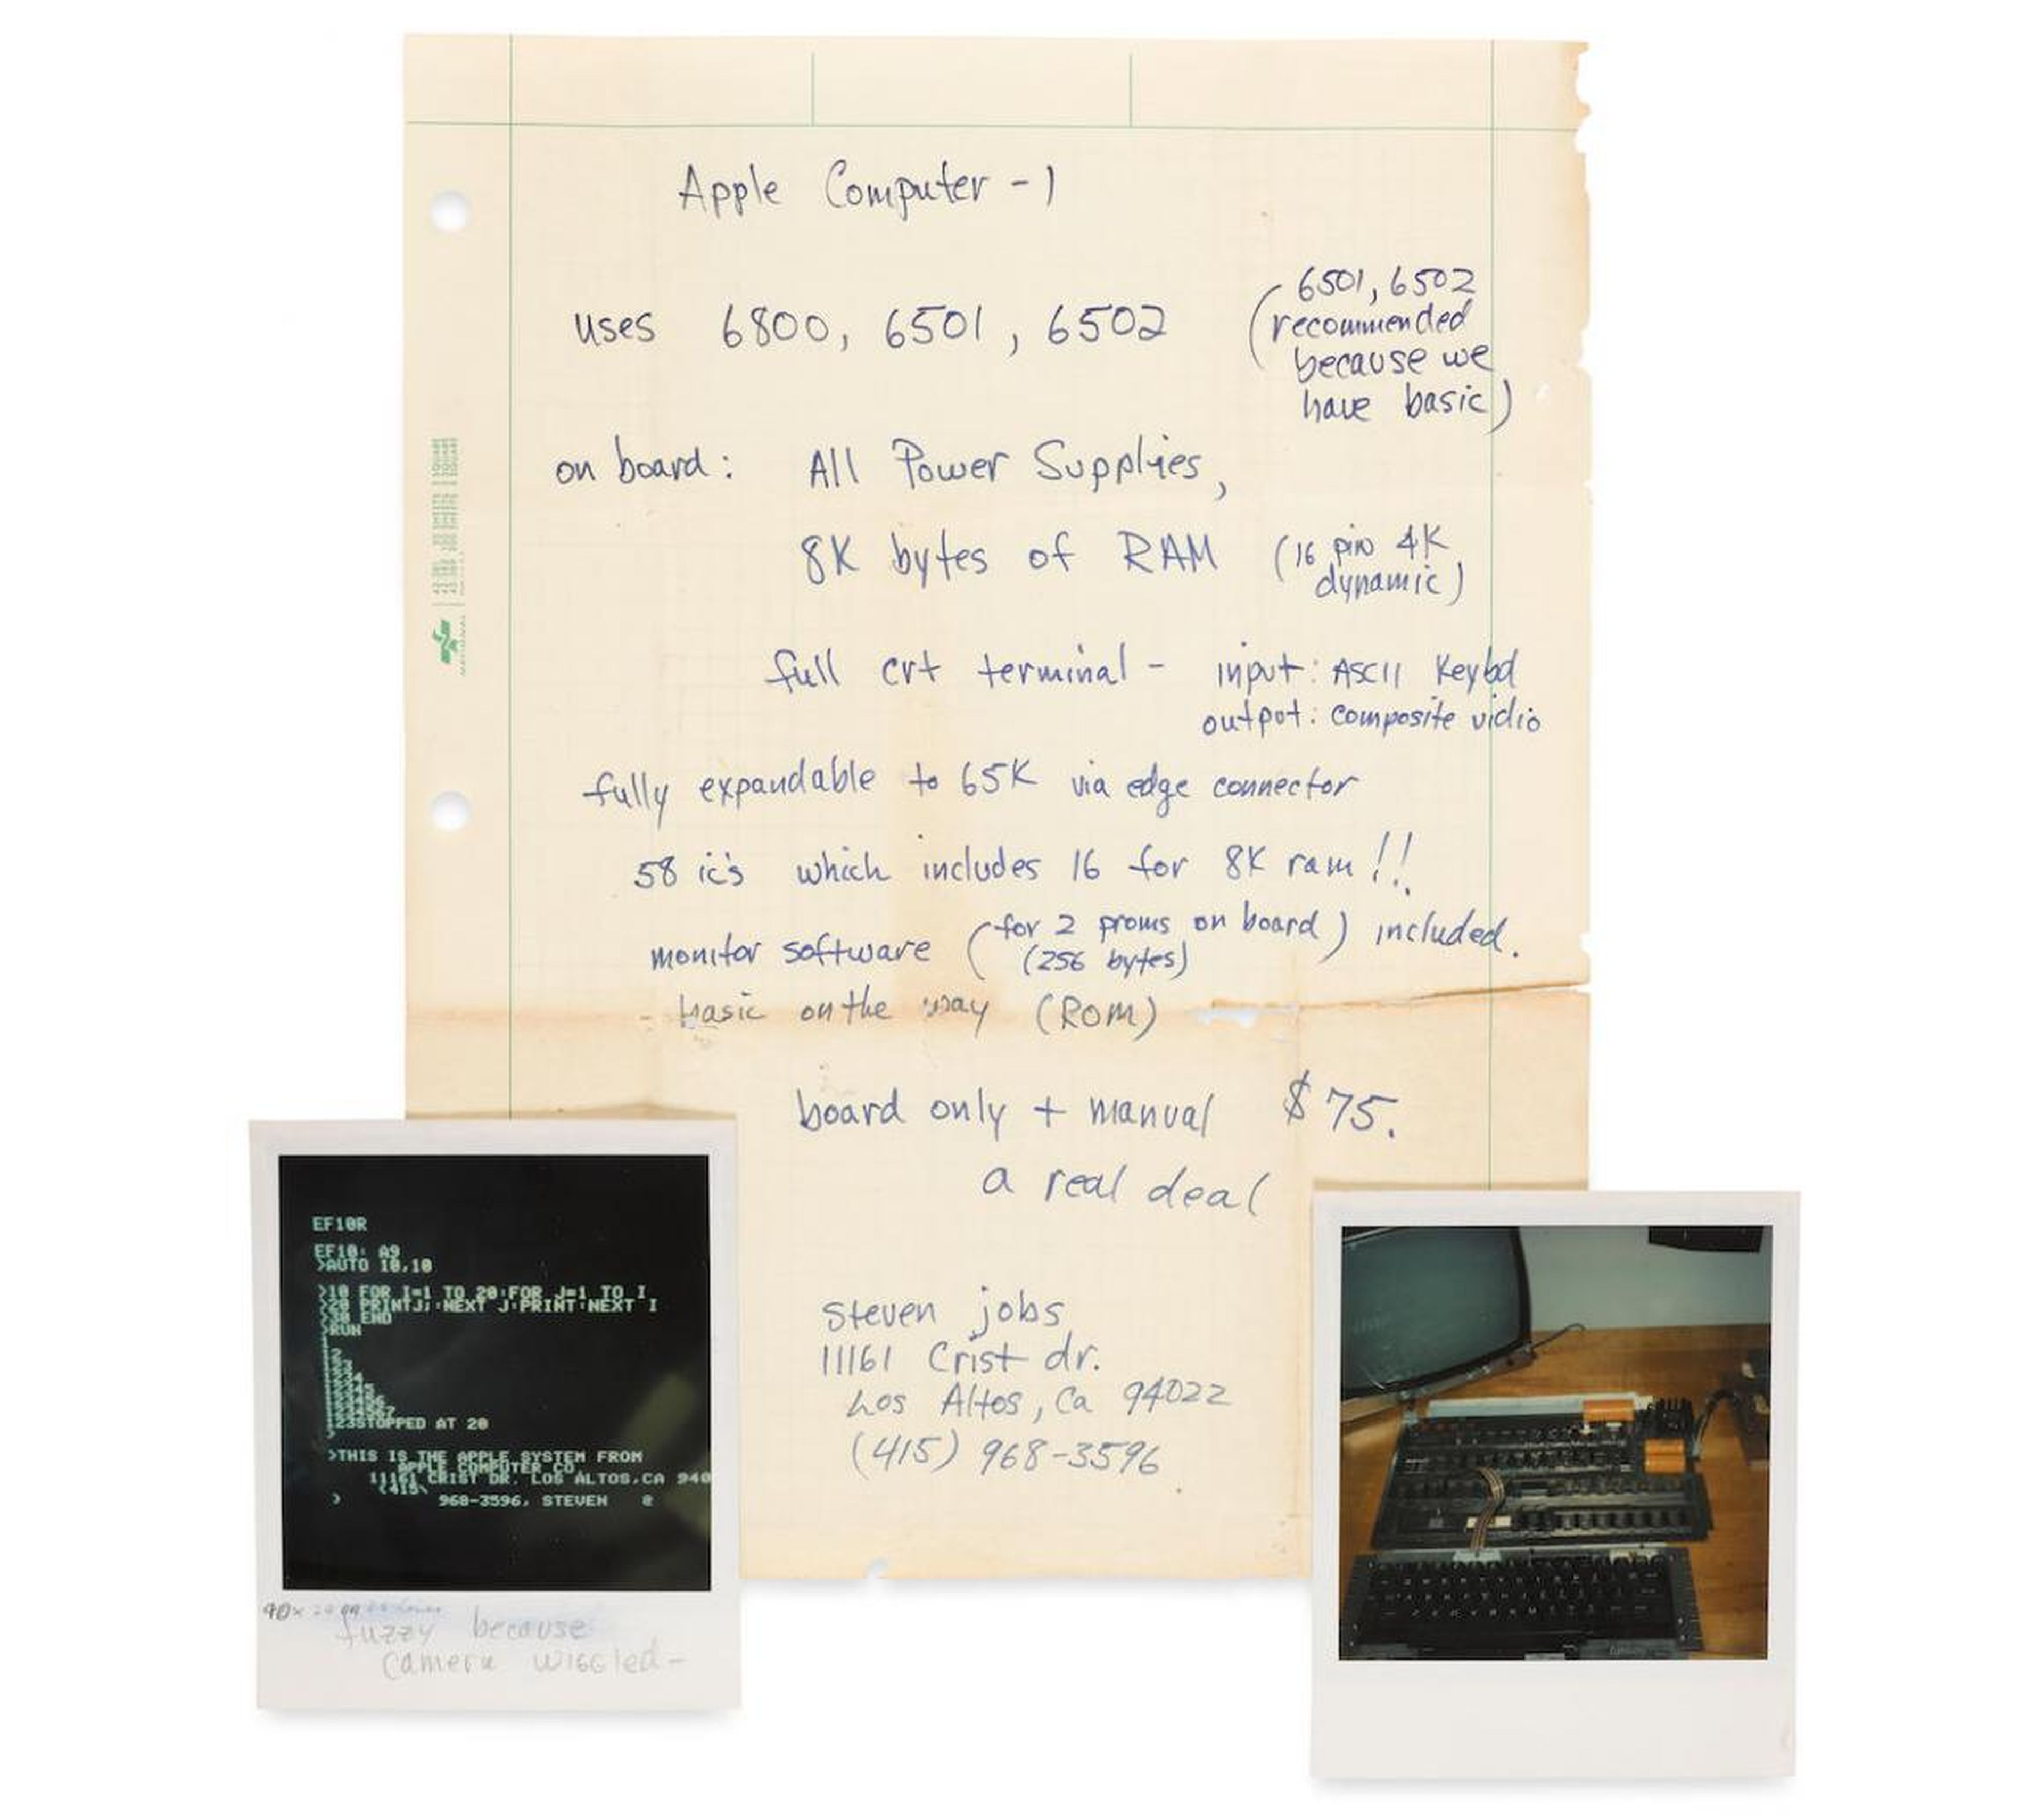 A note handwritten by Steve Jobs about how the first Apple computer was 'a real deal' at $75 has been unearthed